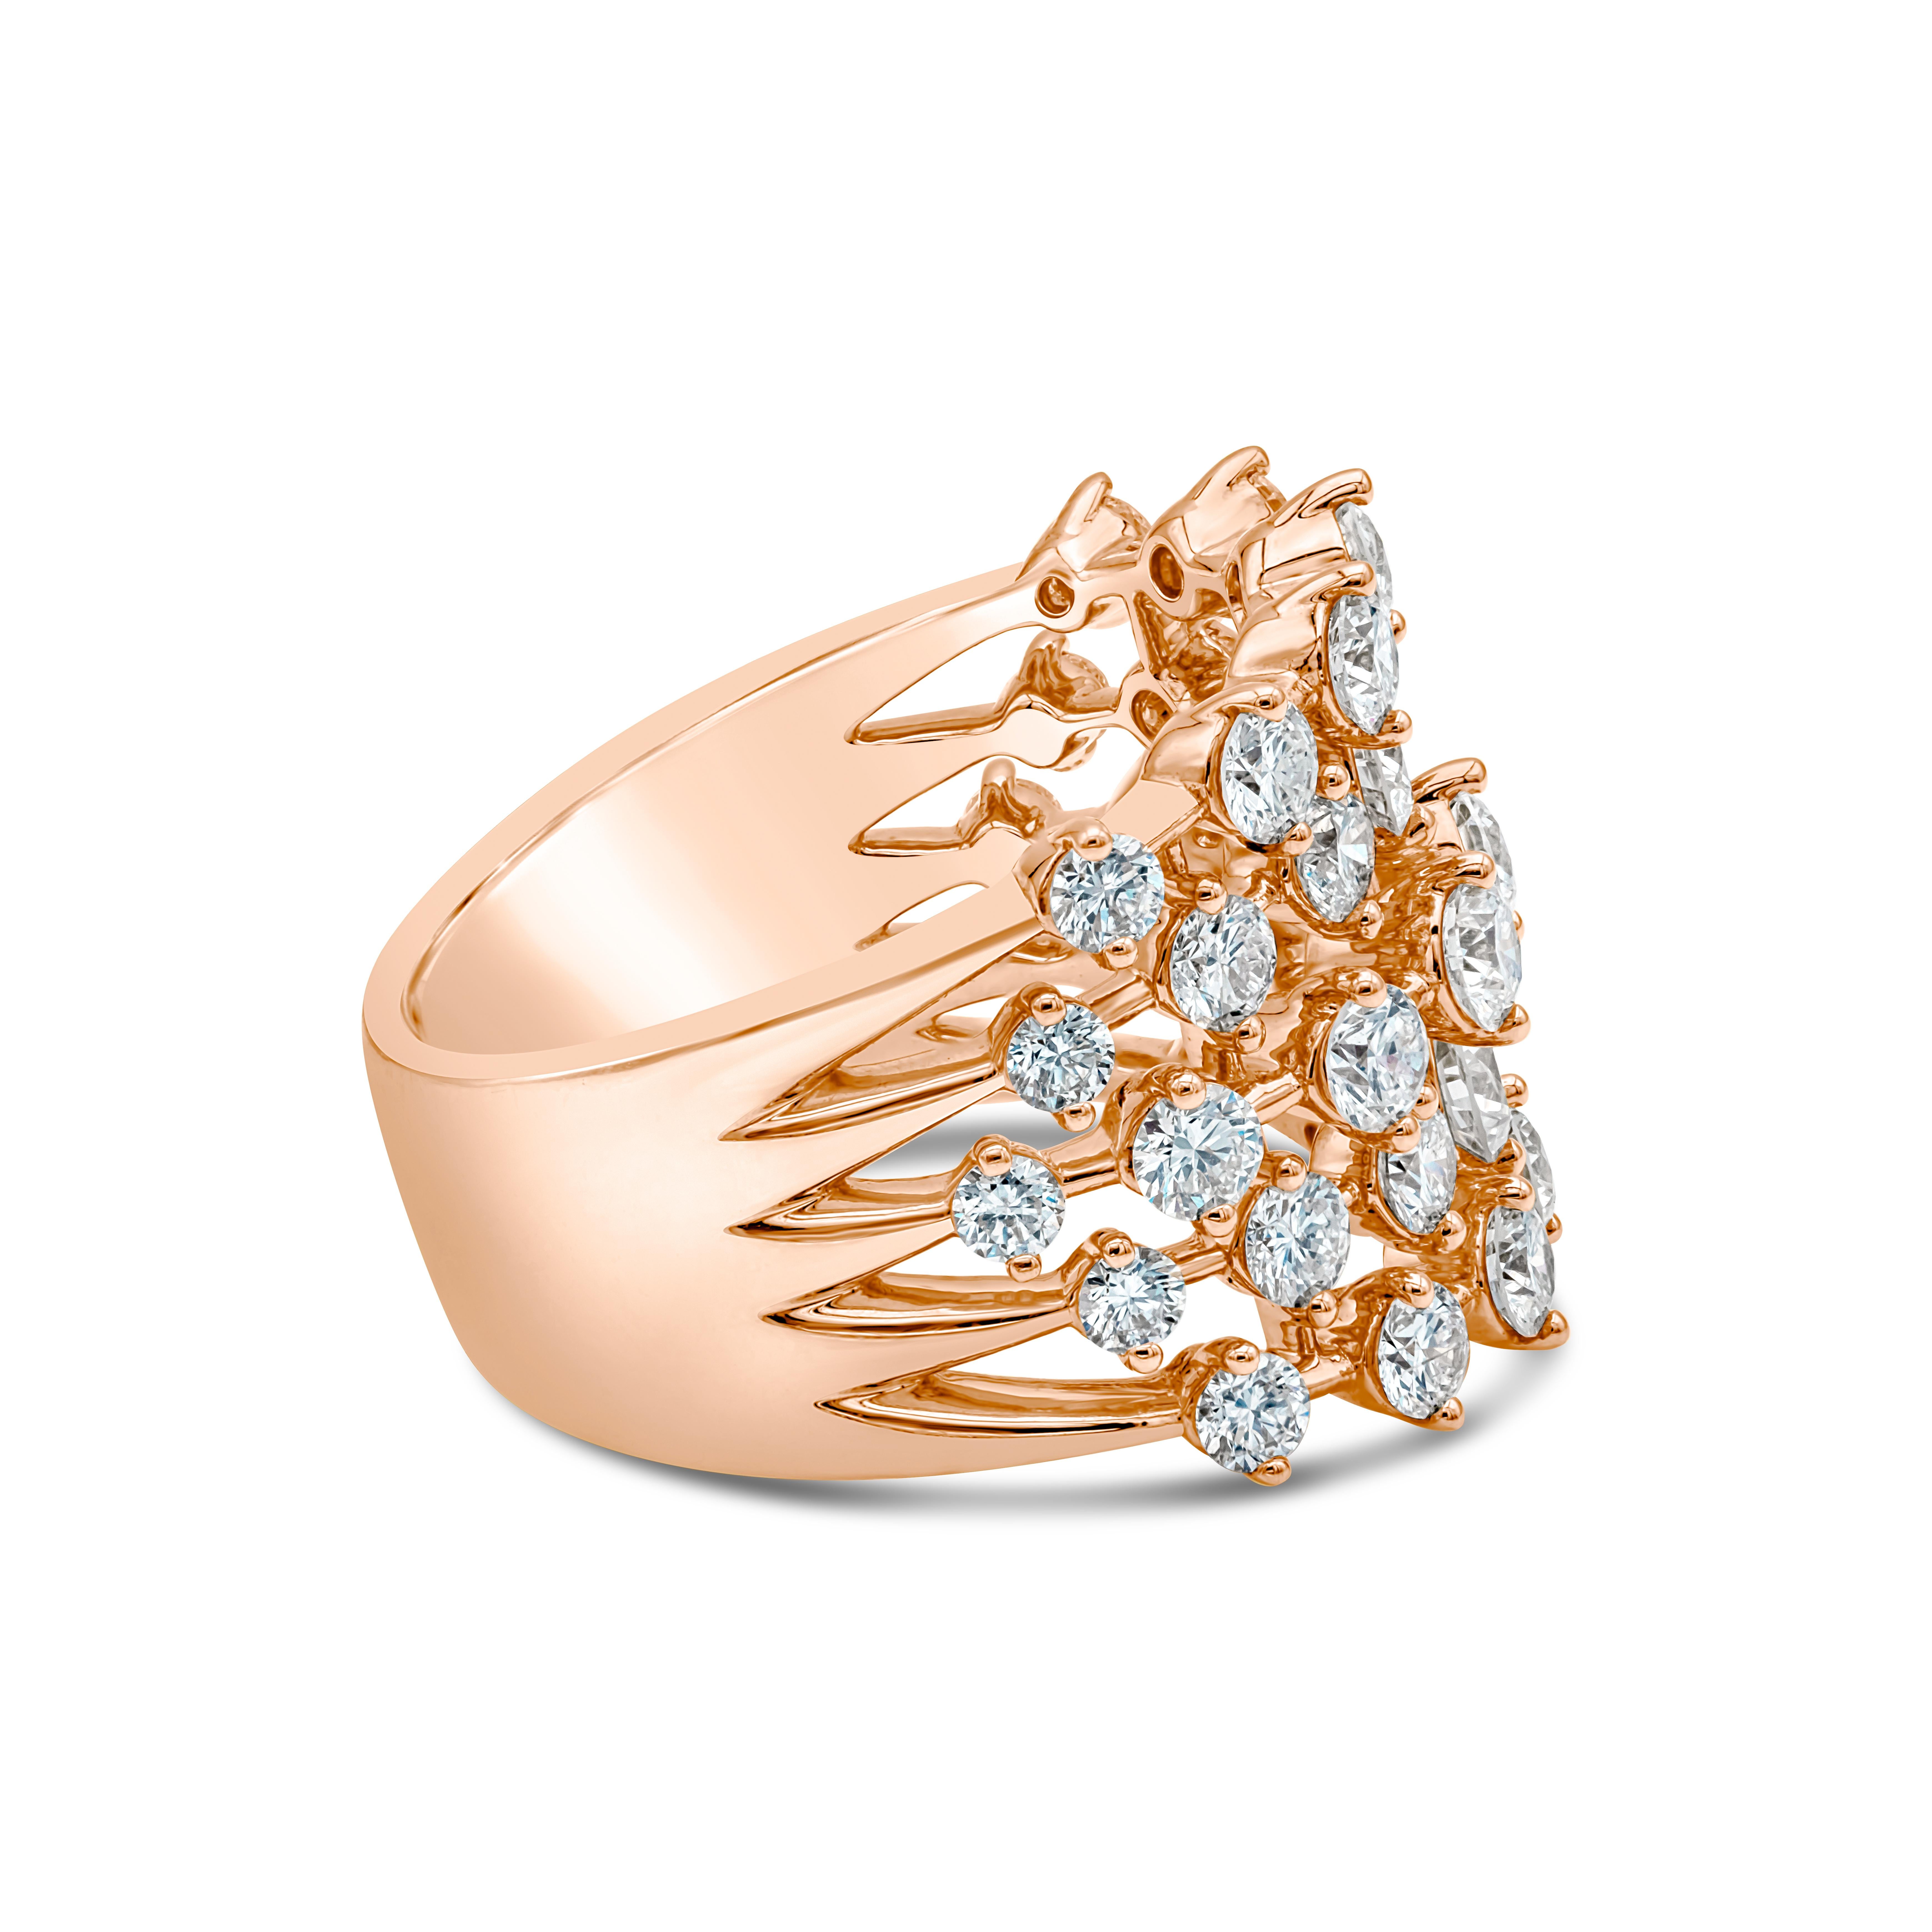 This fashion ring showcases 34 brilliant round diamonds weighing 2.71 carats total.  Each stone mounted in a two-prong setting. Made with 18K Rose Gold. Size 6.75 US.

Roman Malakov is a custom house, specializing in creating anything you can